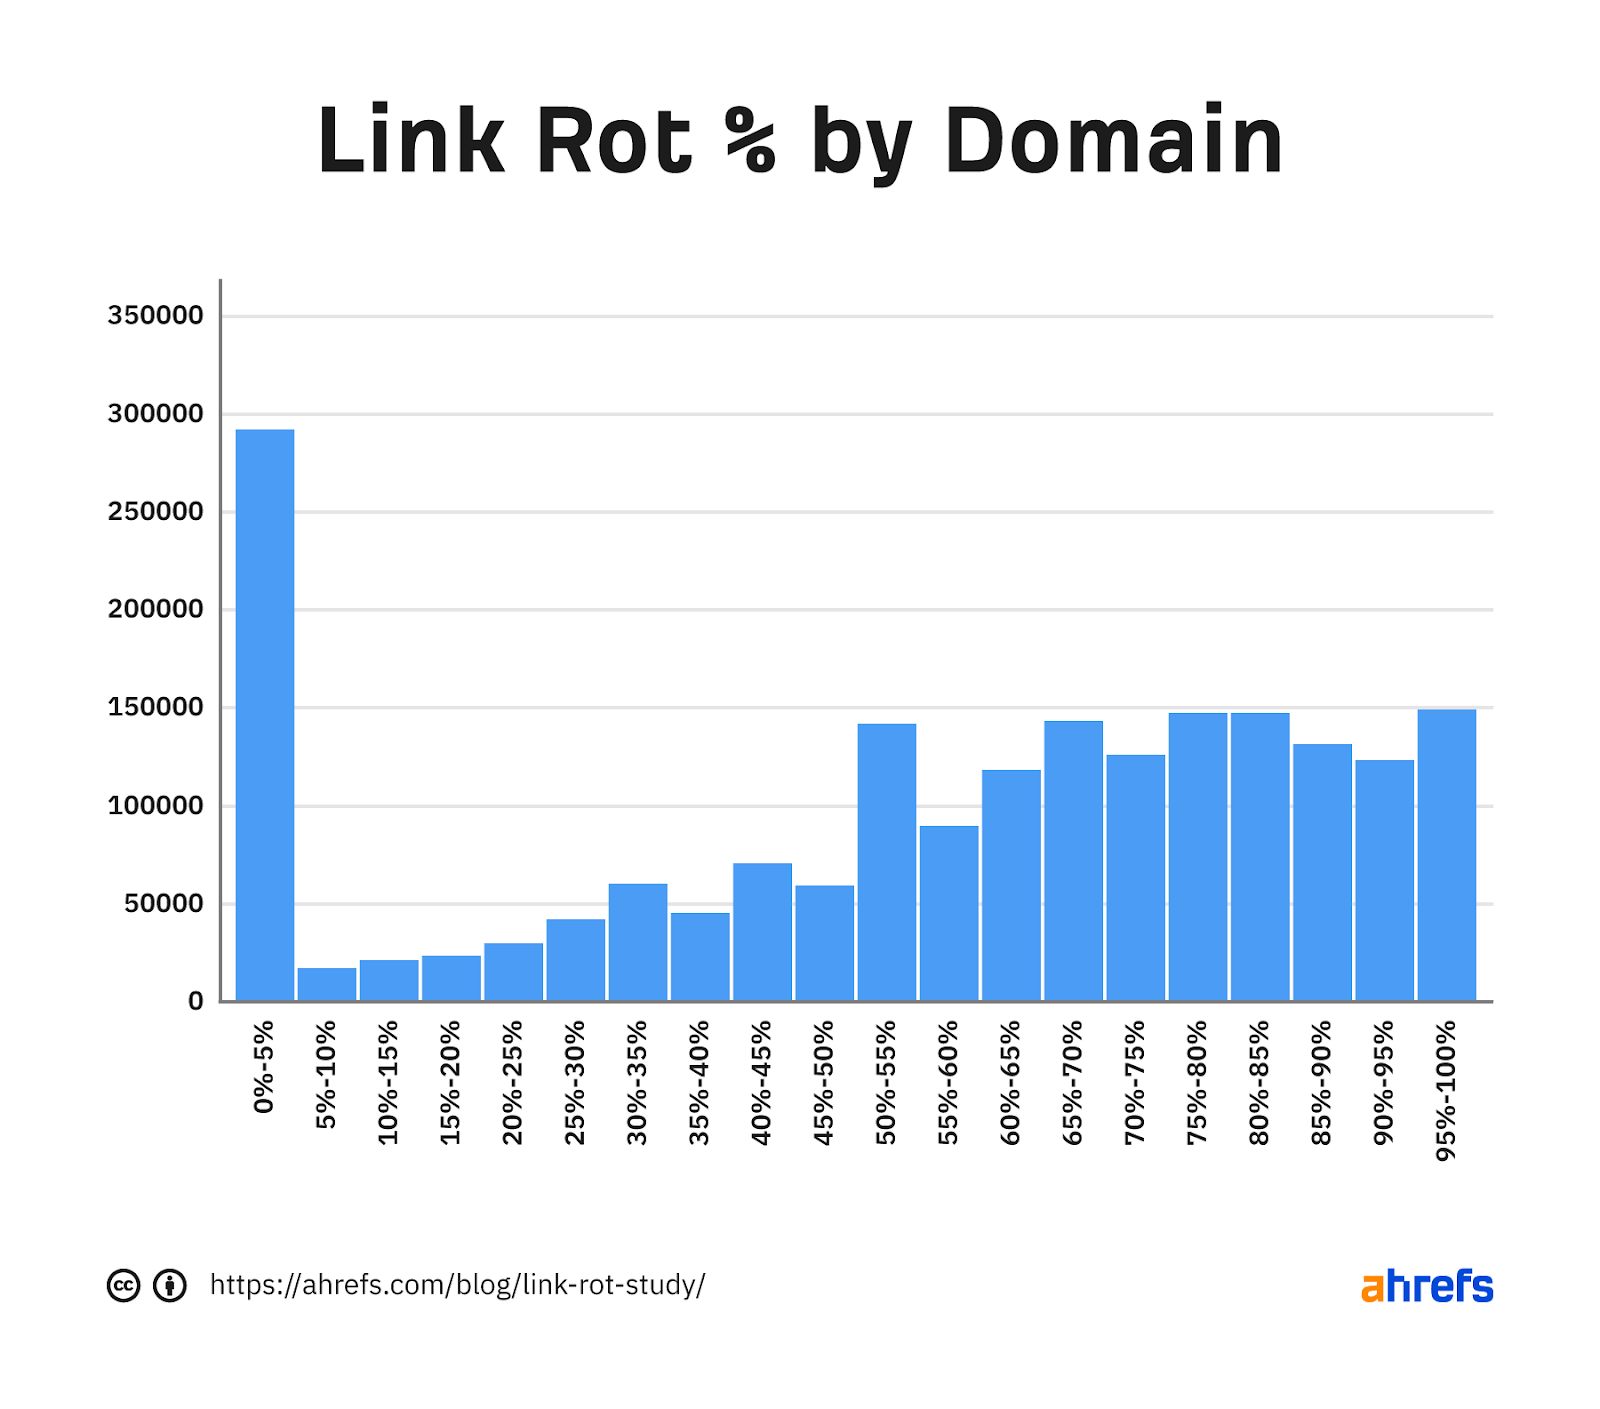 Histogram showing the link rot percentage that occurs by number of domains